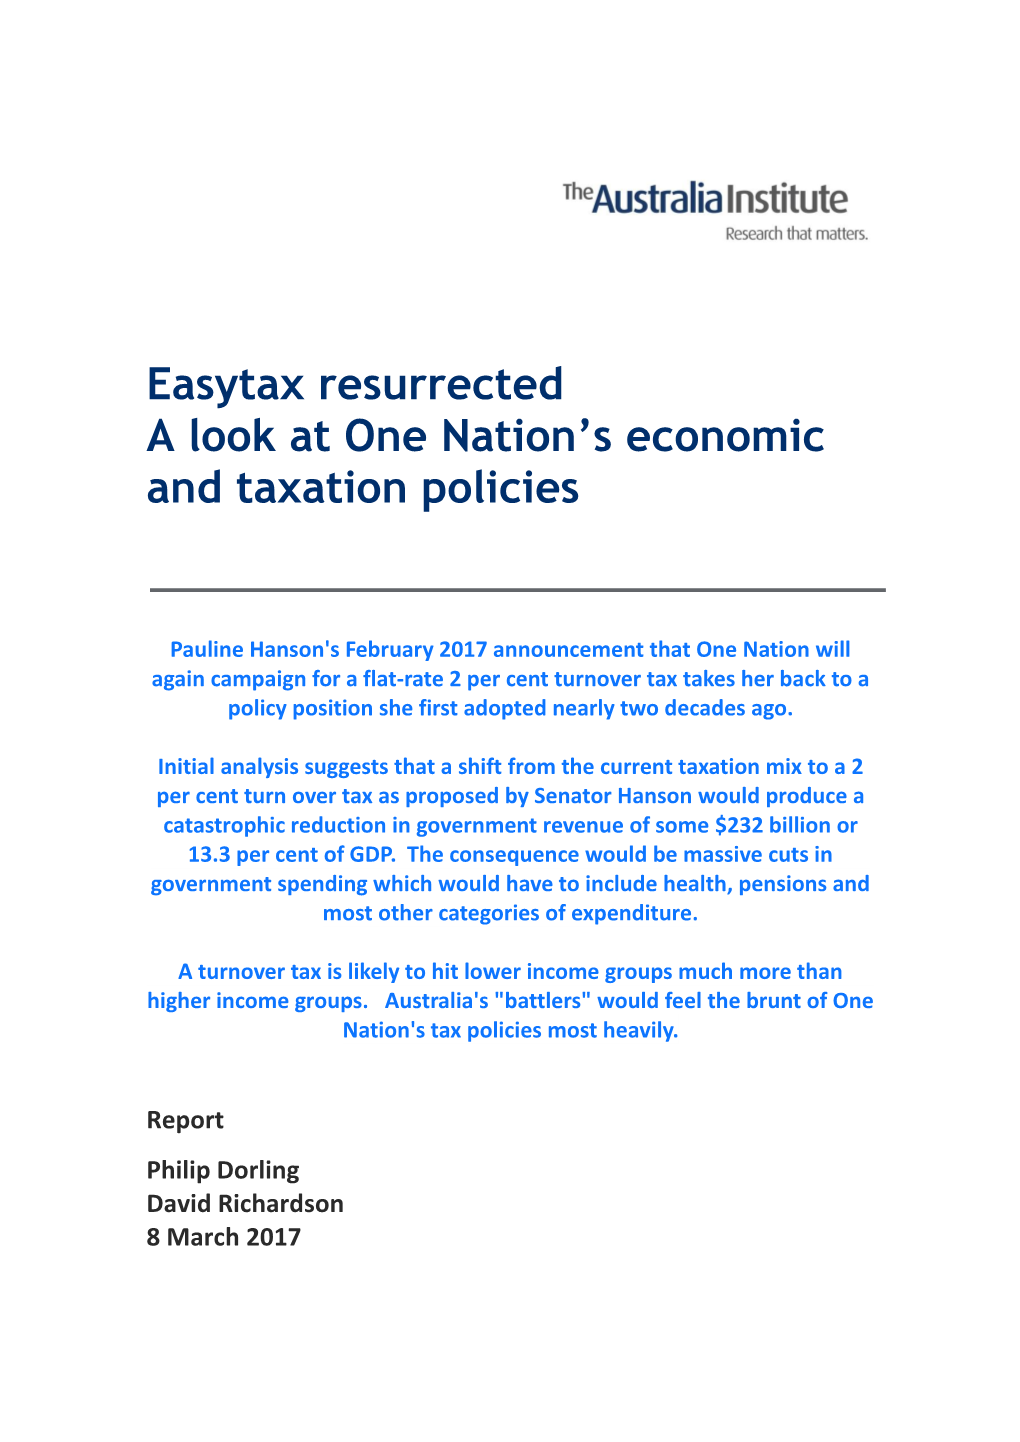 Easytax Resurrected a Look at One Nation's Economic and Taxation